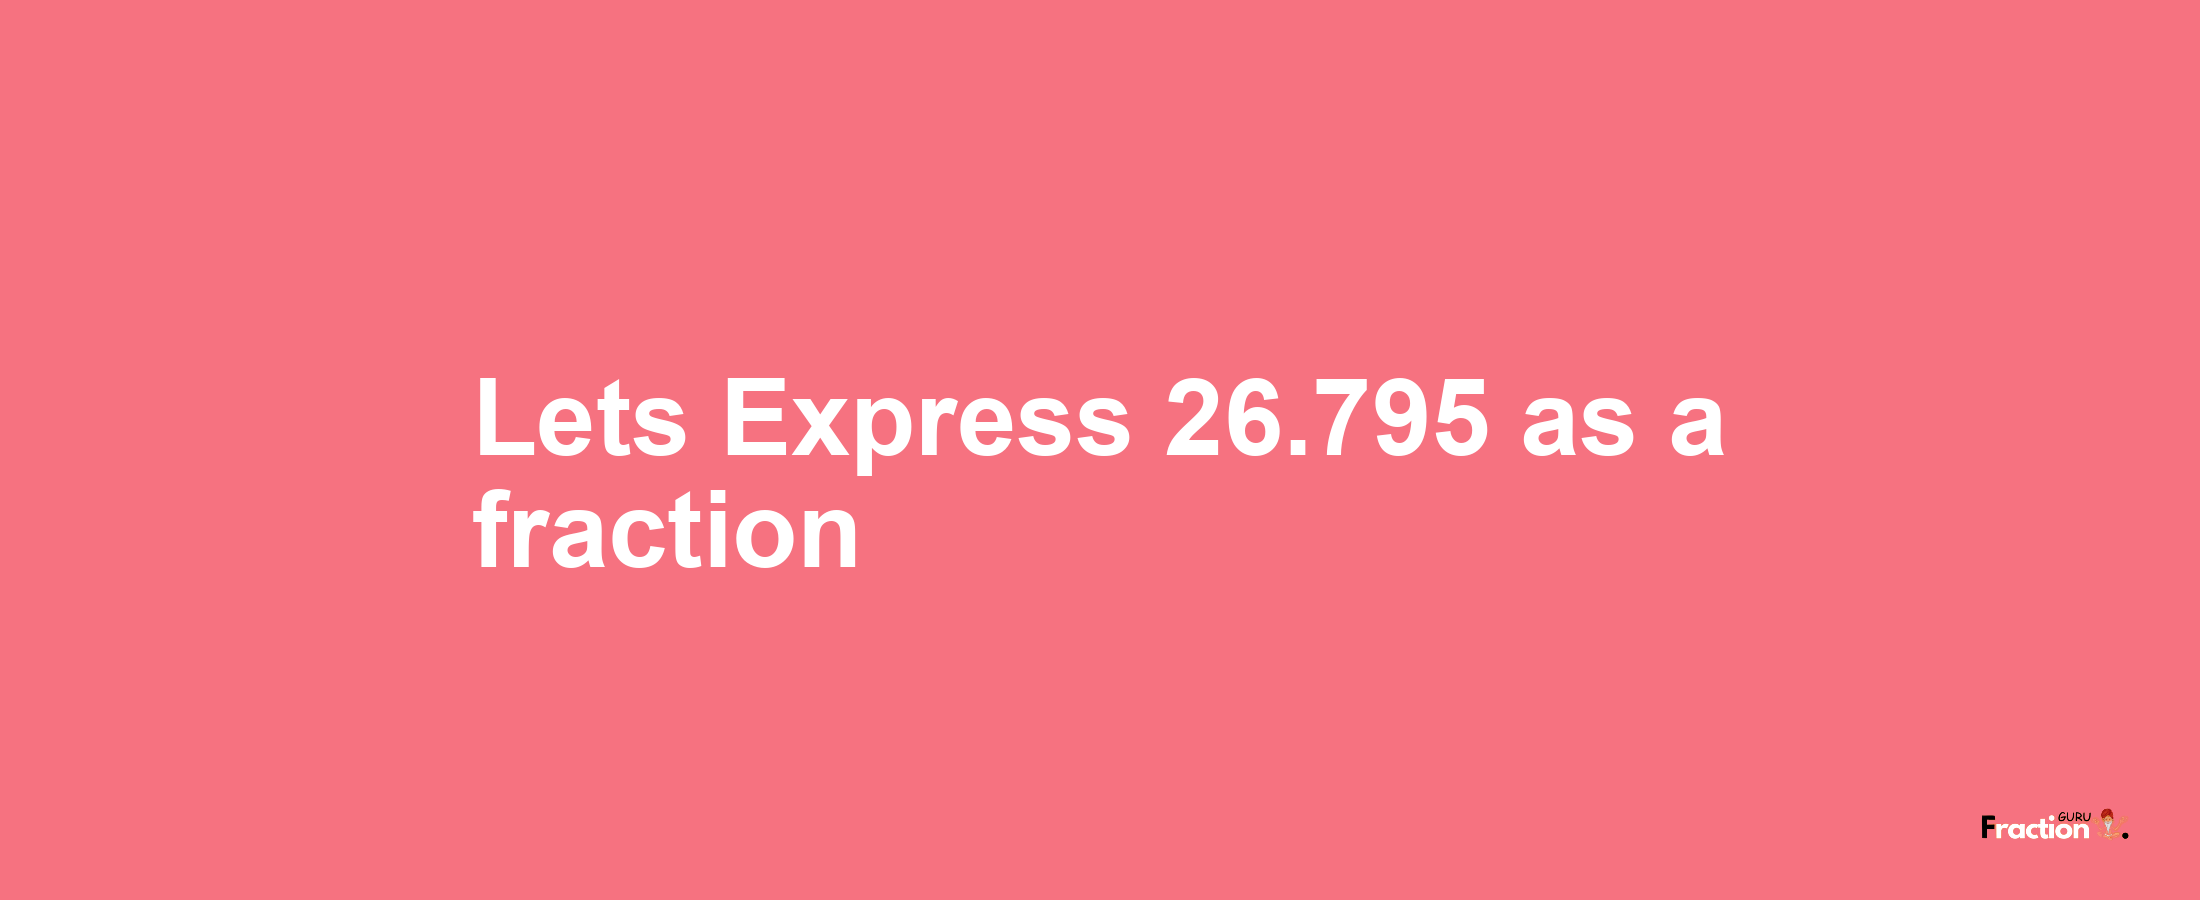 Lets Express 26.795 as afraction